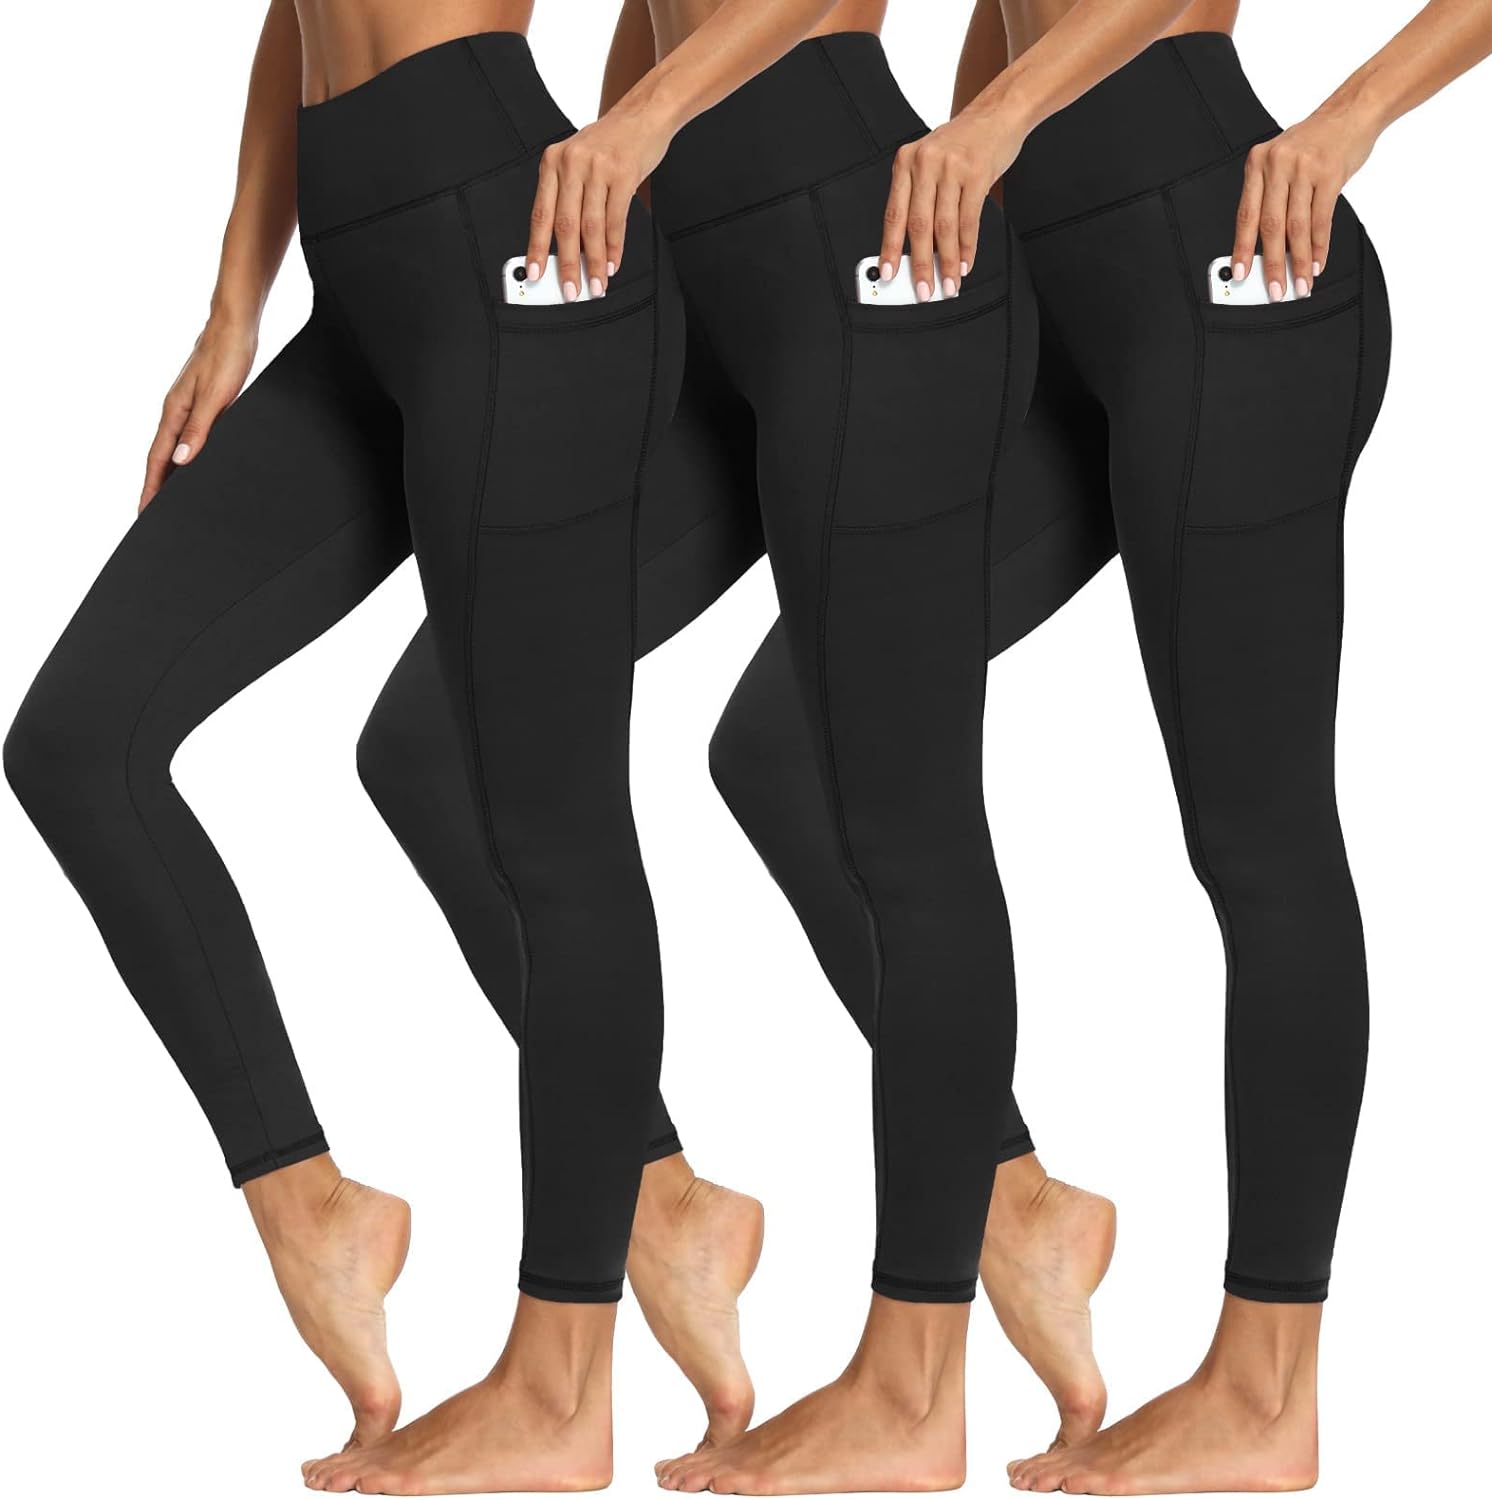 3 Packs Leggings with Pockets for Women, Soft High Waisted Tummy Control Workout Yoga Pants (Reg Plus Size)